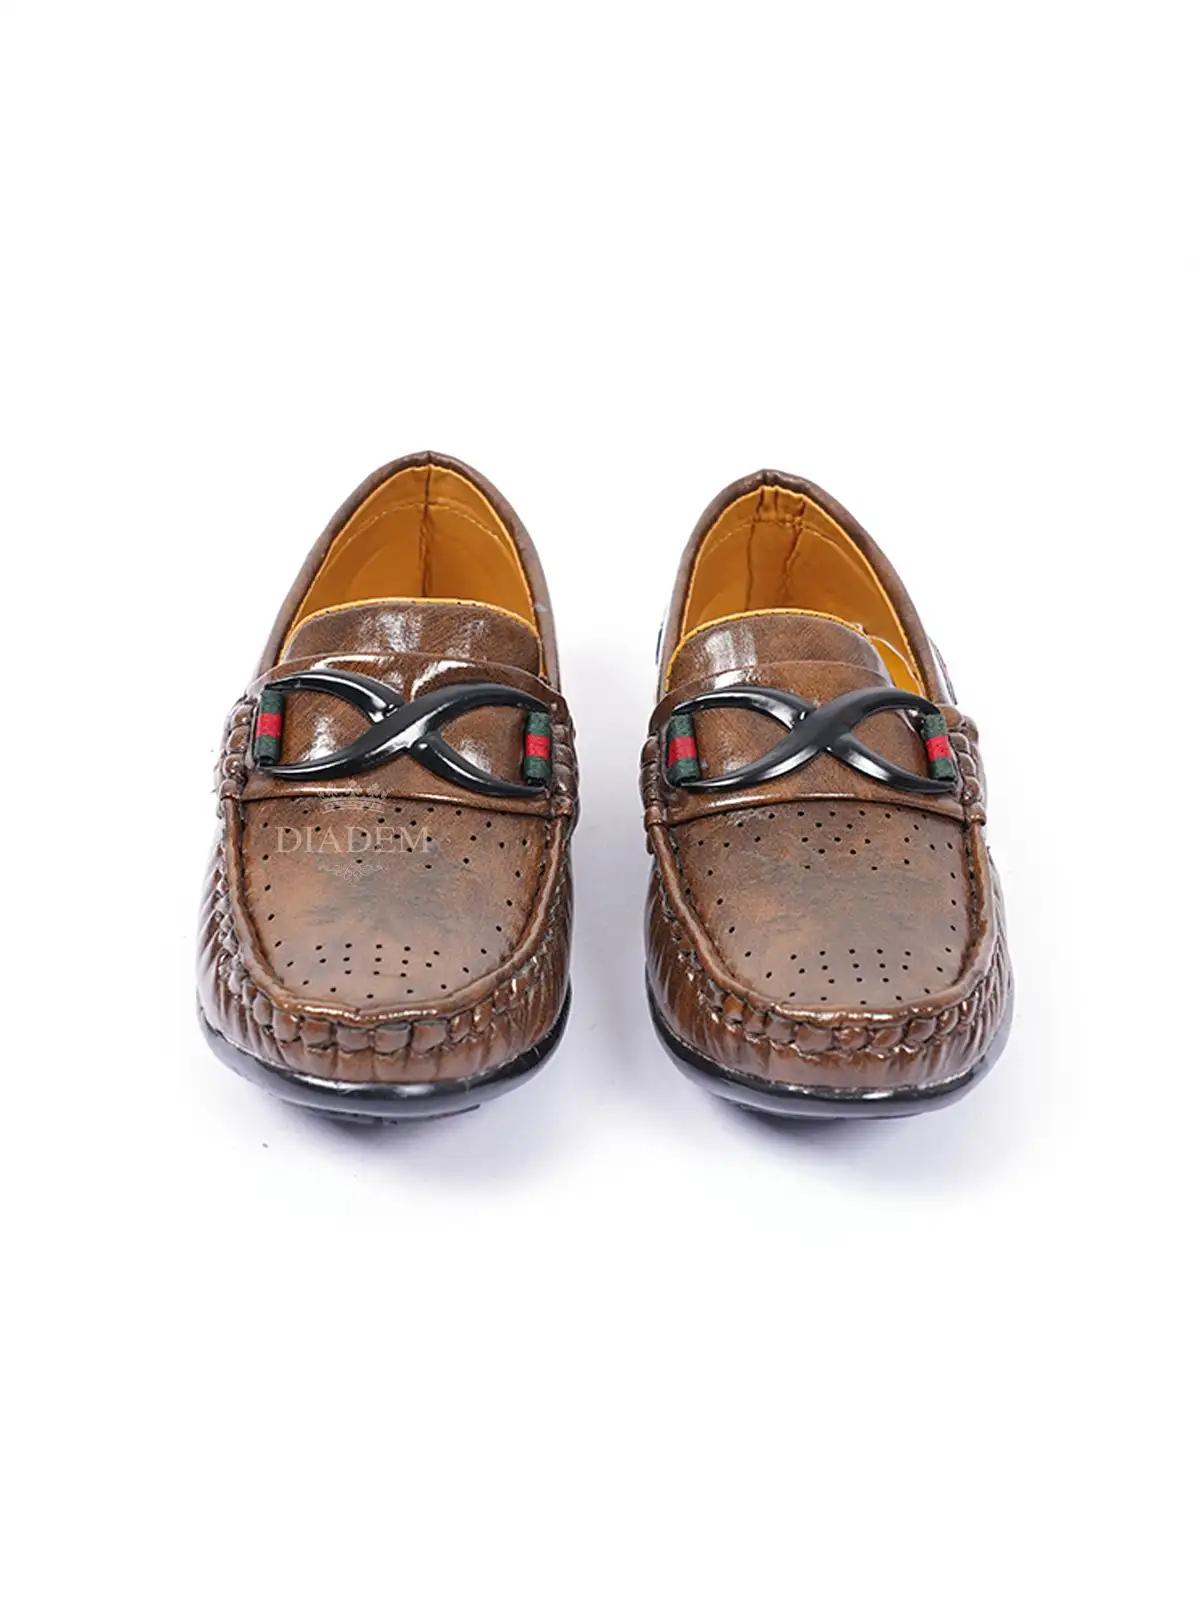 Unique Brown With Hollow Weave Holes Loafer